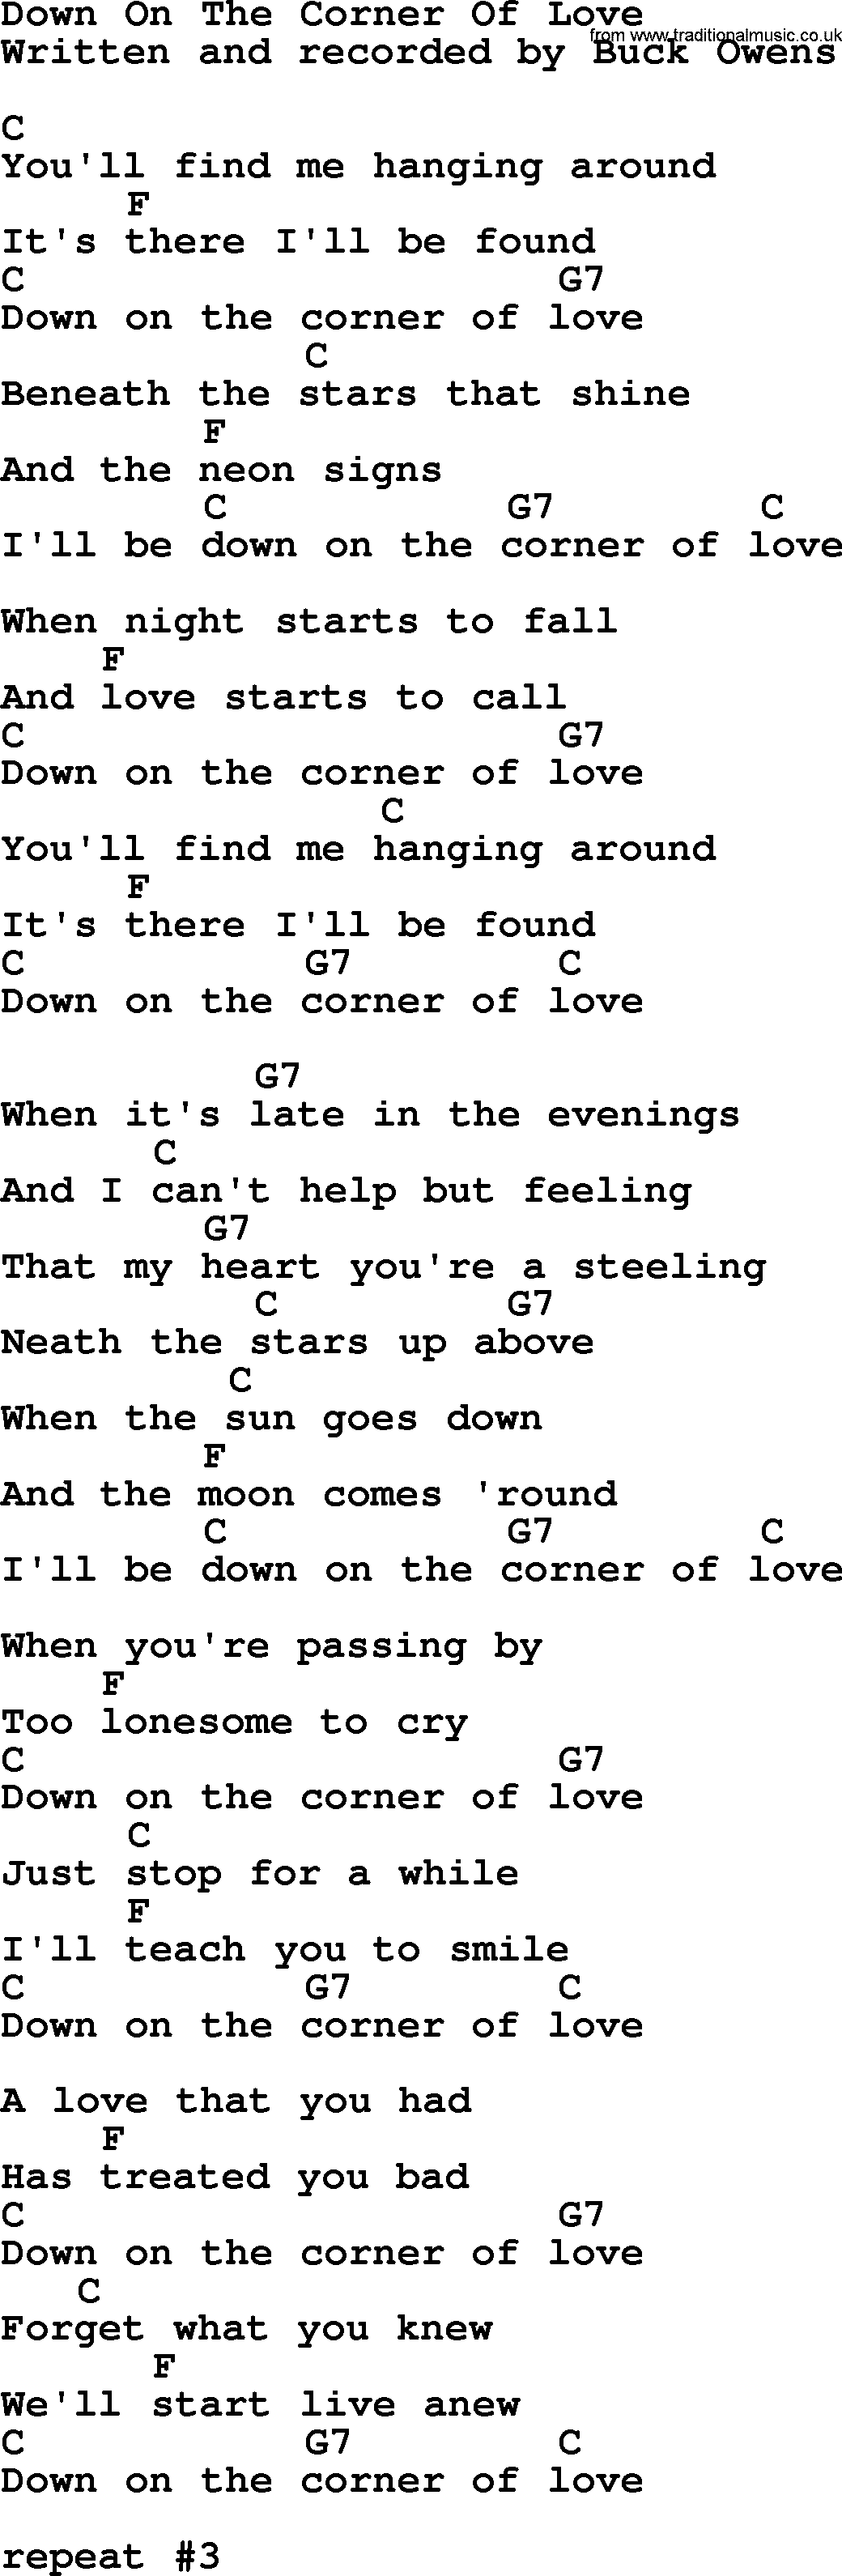 Bluegrass song: Down On The Corner Of Love, lyrics and chords